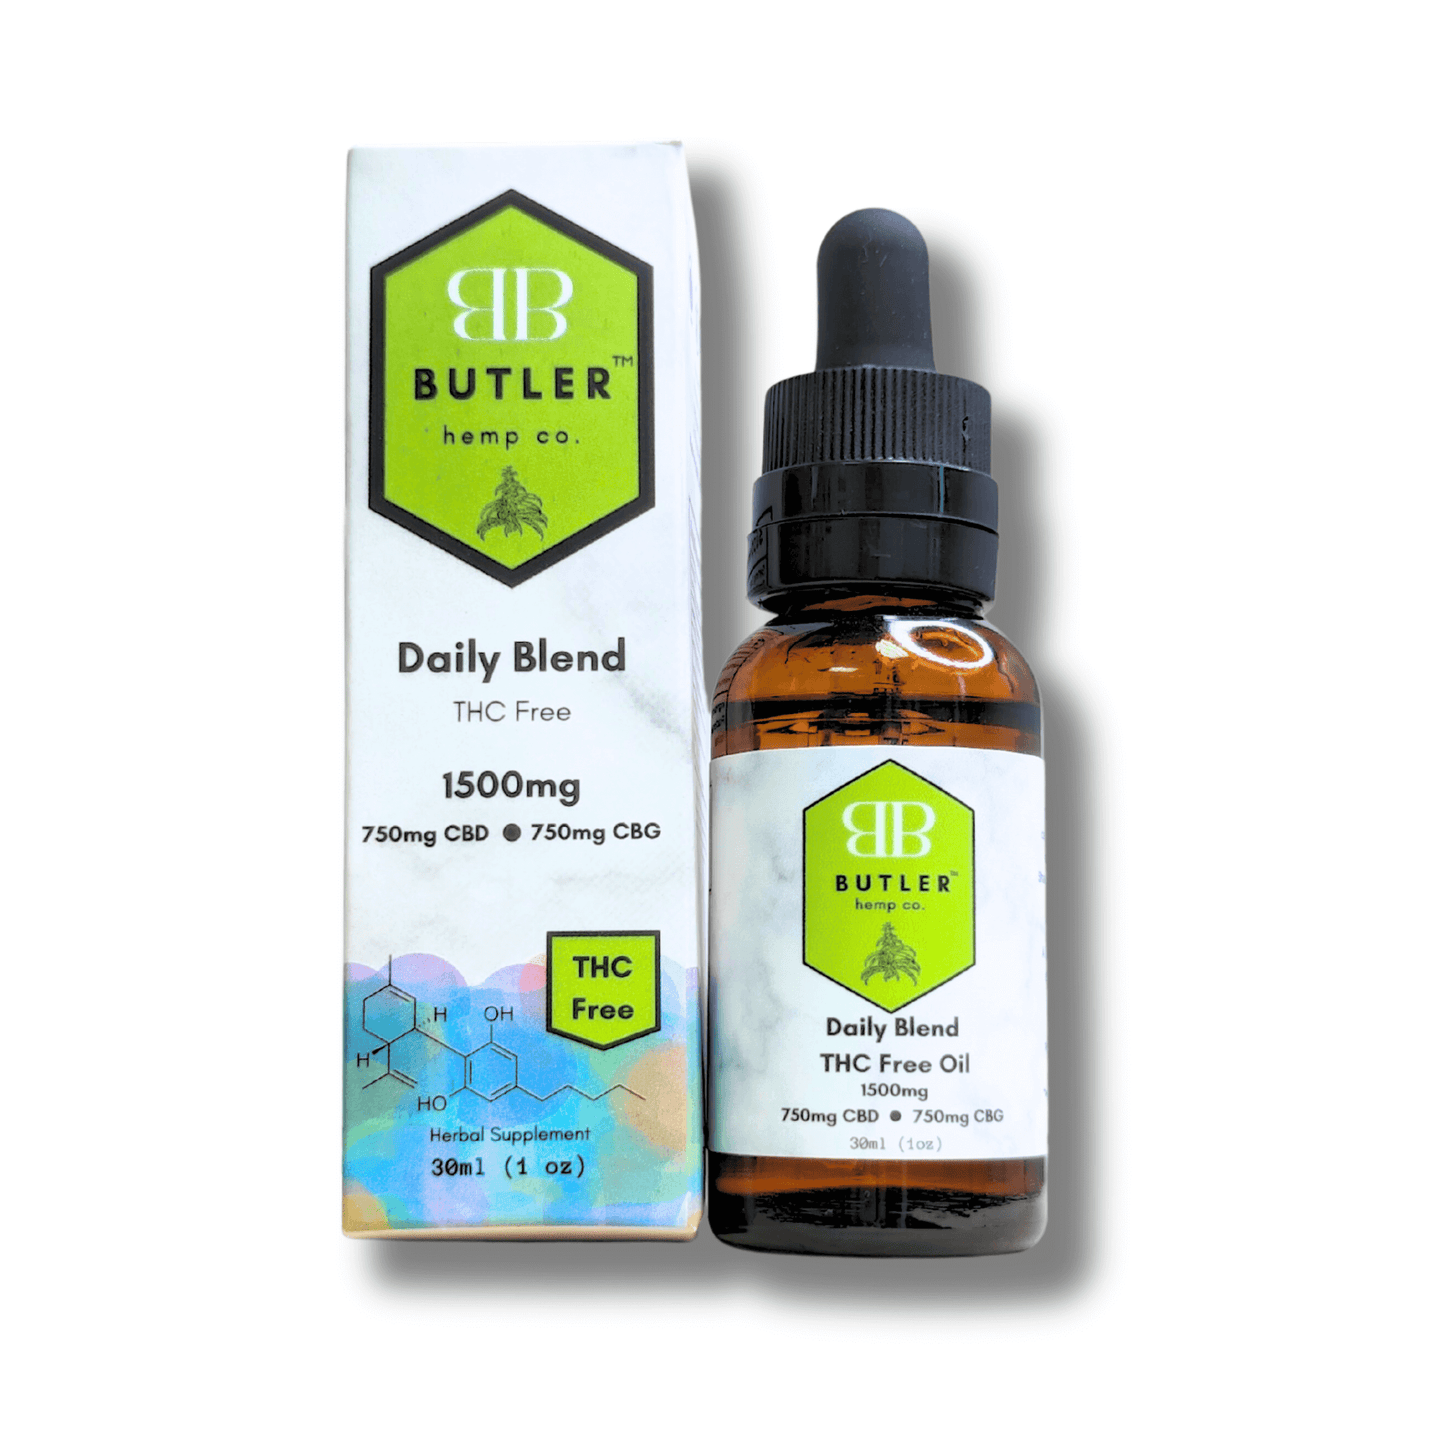 This blend of CBD and CBG isolate works together to deliver a one-two punch to both musculoskeletal and digestive inflammatory pain, ease tension and anxiety, and restore homeostasis and wellness to both body and brain.